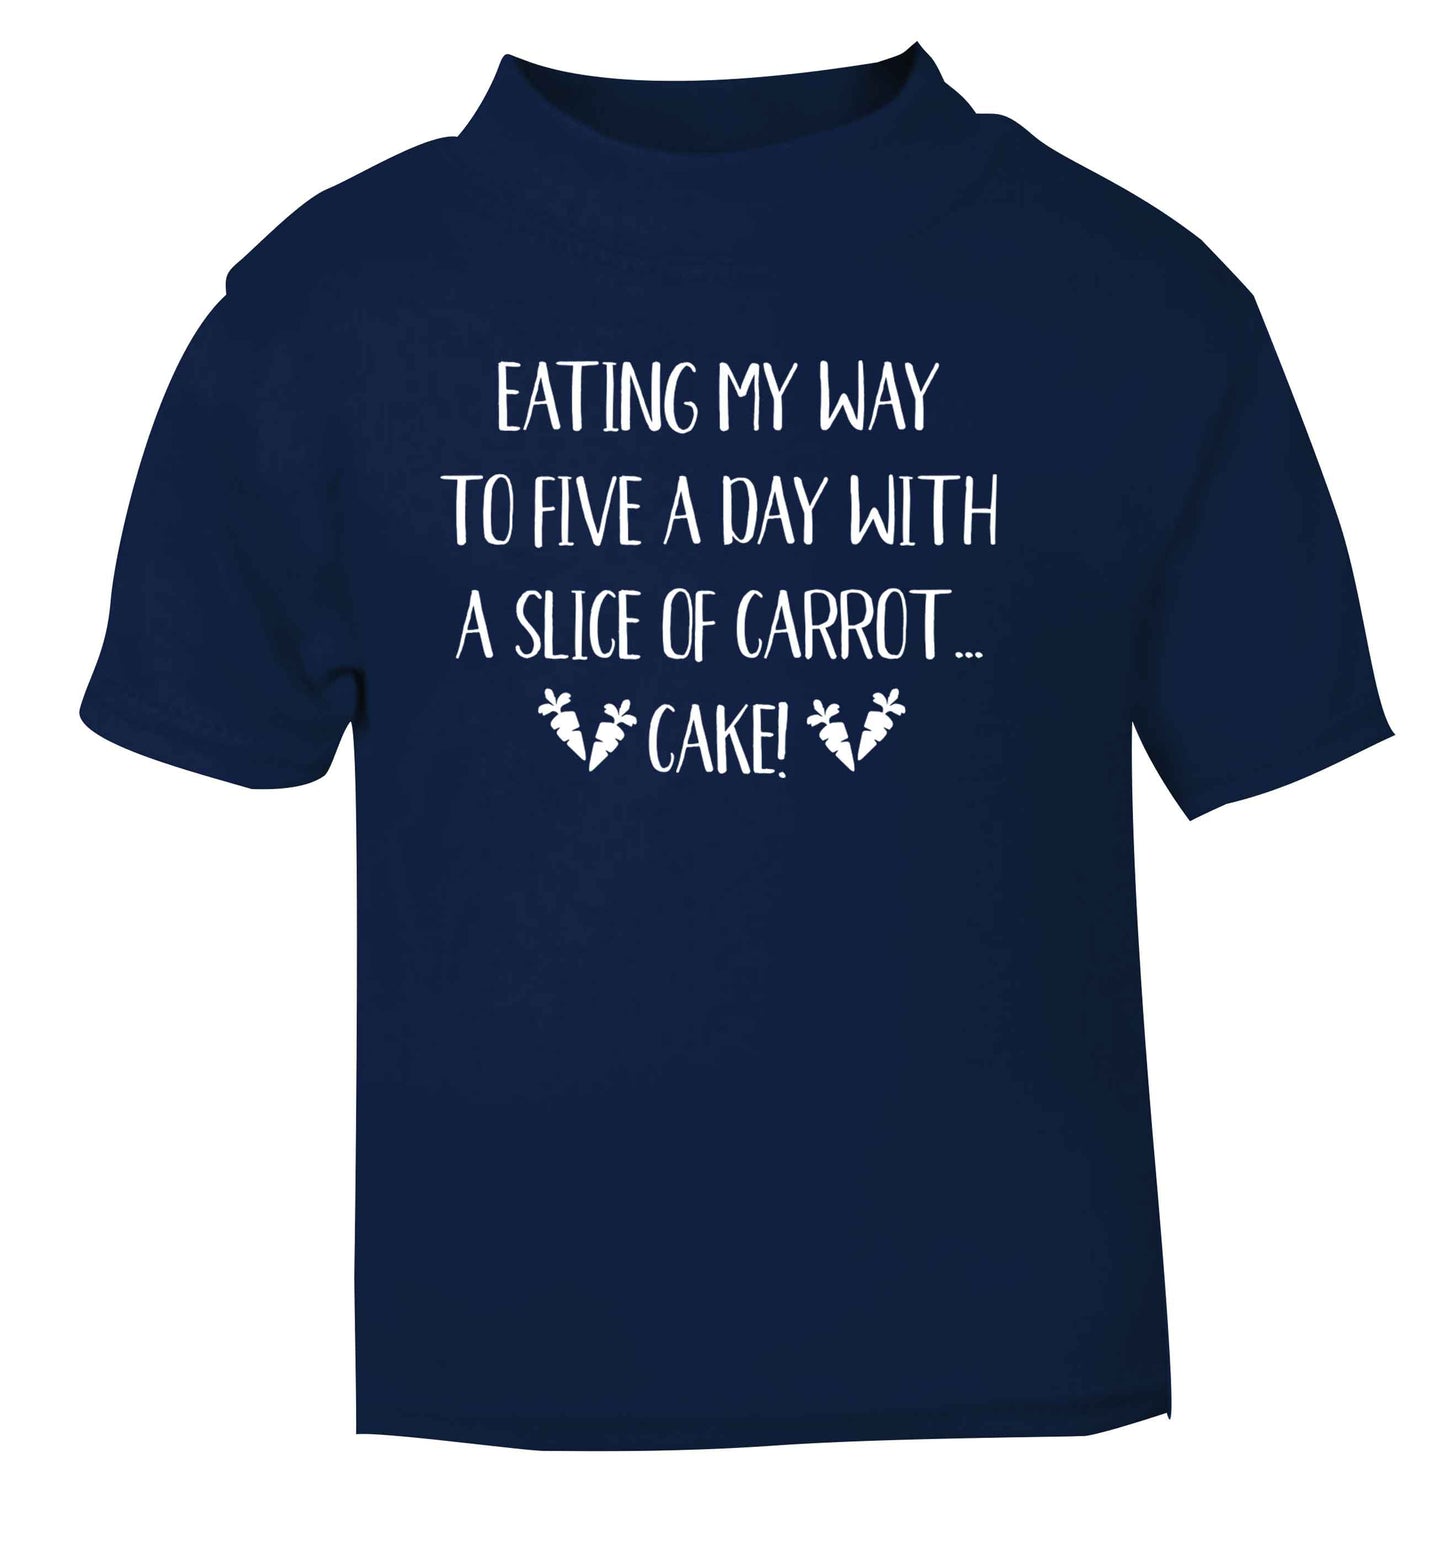 Eating my way to five a day with a slice of carrot cake day navy Baby Toddler Tshirt 2 Years